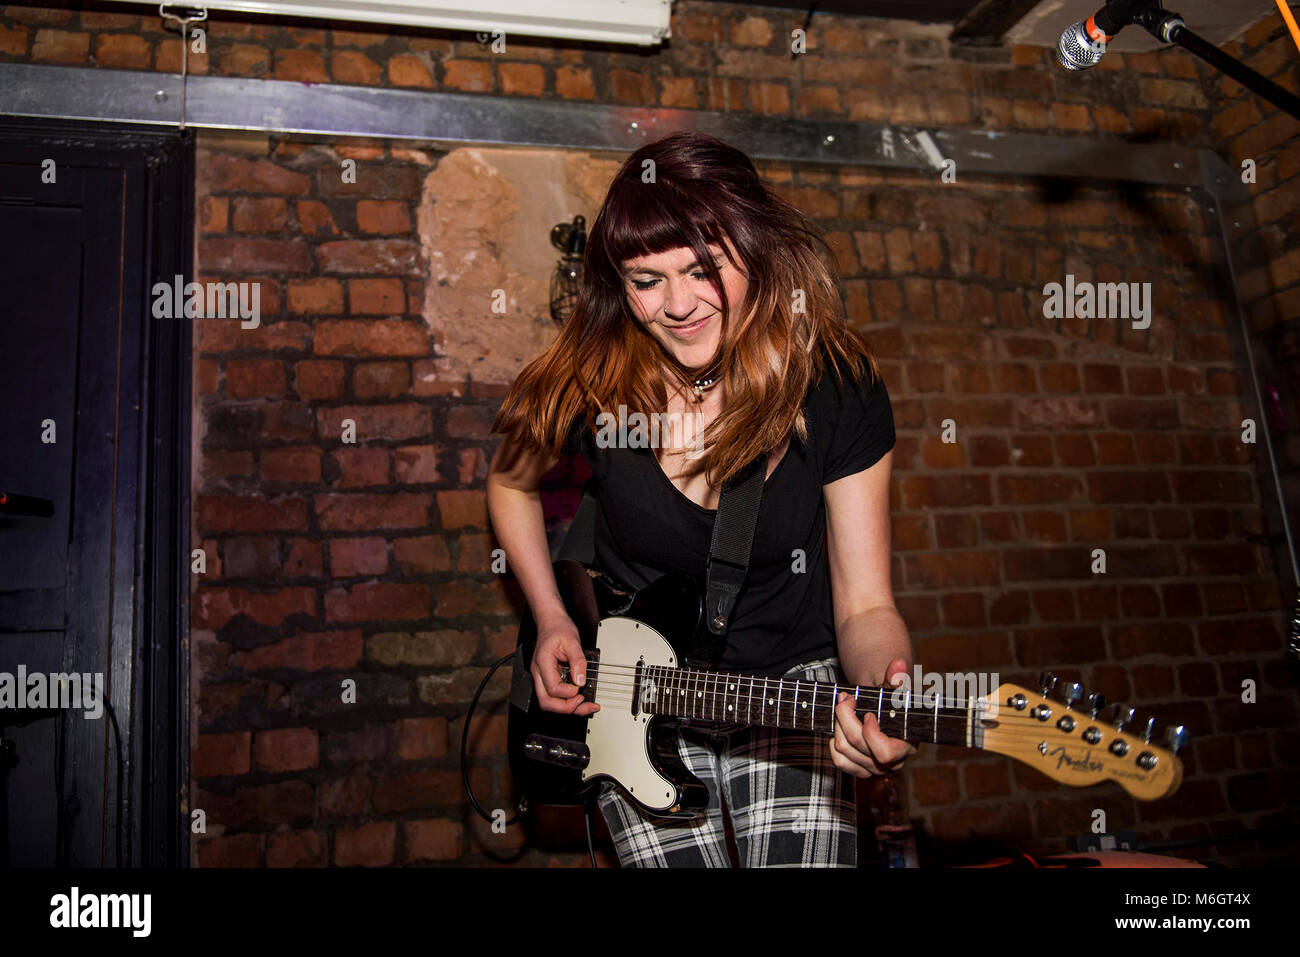 Manchester, UK. 3rd March 2018. Rews, London/Belfast based high-energy alternative rock duo consisting of songstress Shauna Tohill and vocalising beat-rocker Collette Williams performing at the Eagle Inn  in Manchester 03/03/2018 Credit: Gary Mather/Alamy Live News Stock Photo